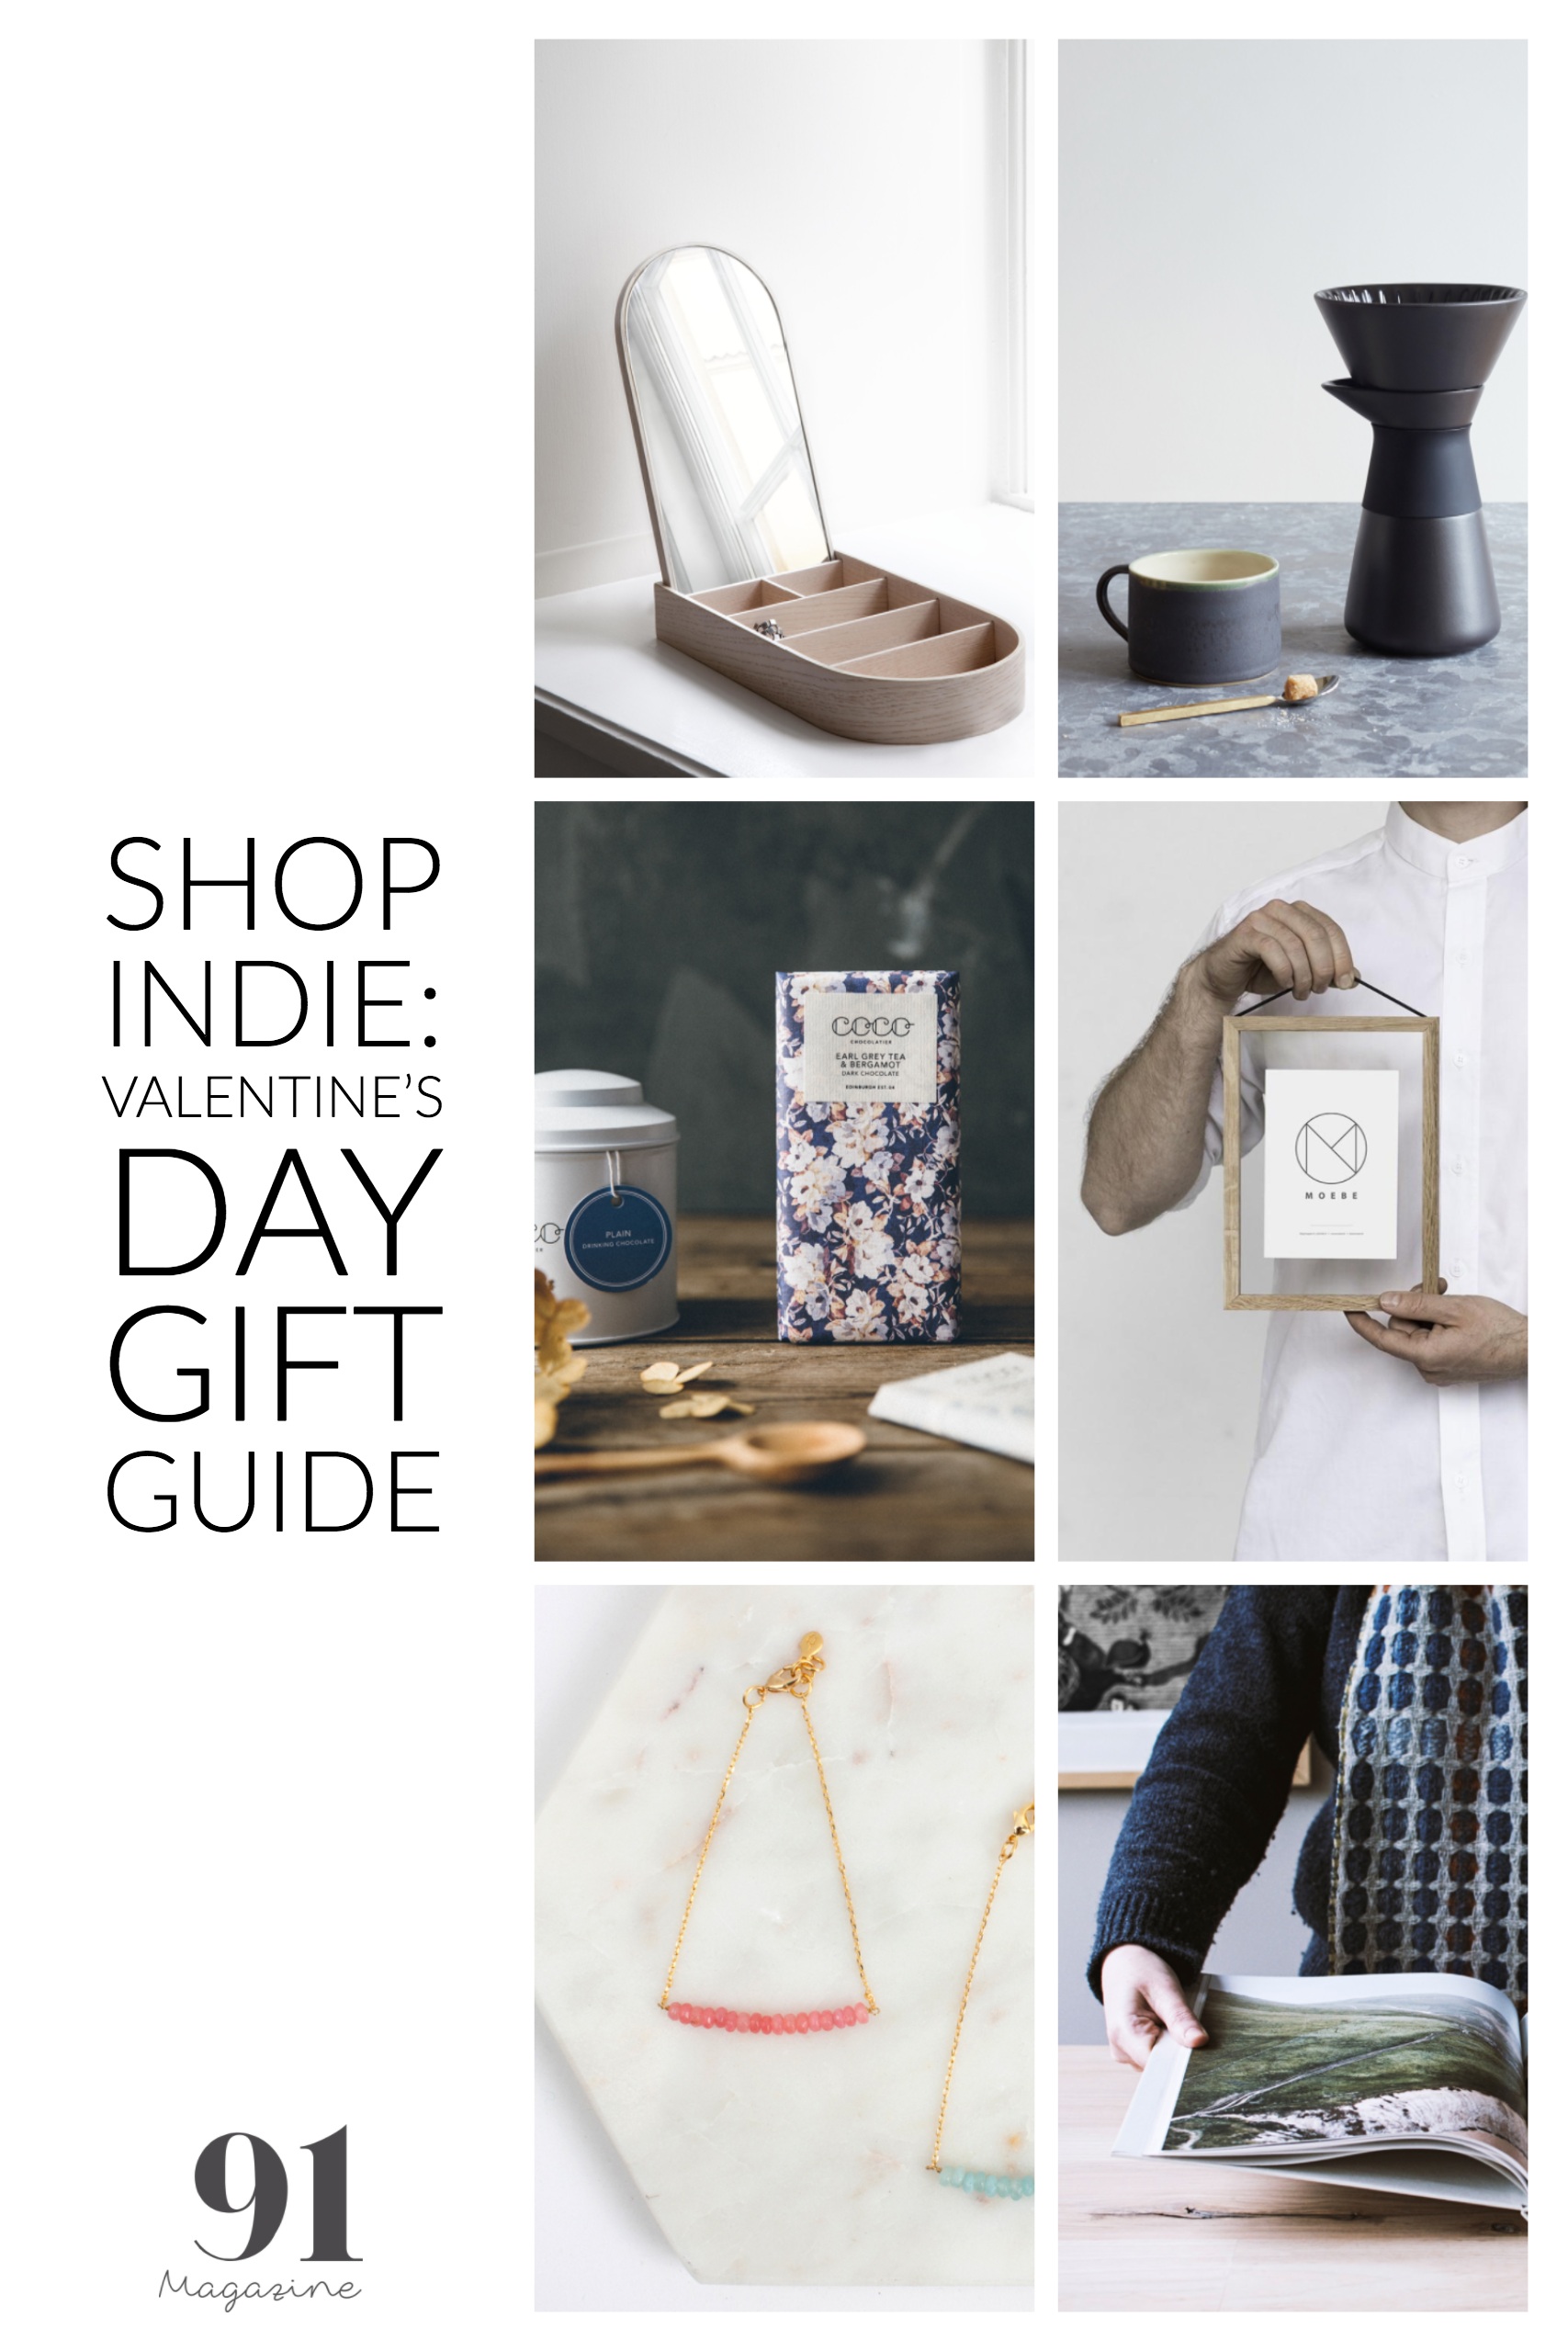 Shop independent this Valentines Day - Gift Guide by 91 Magazine